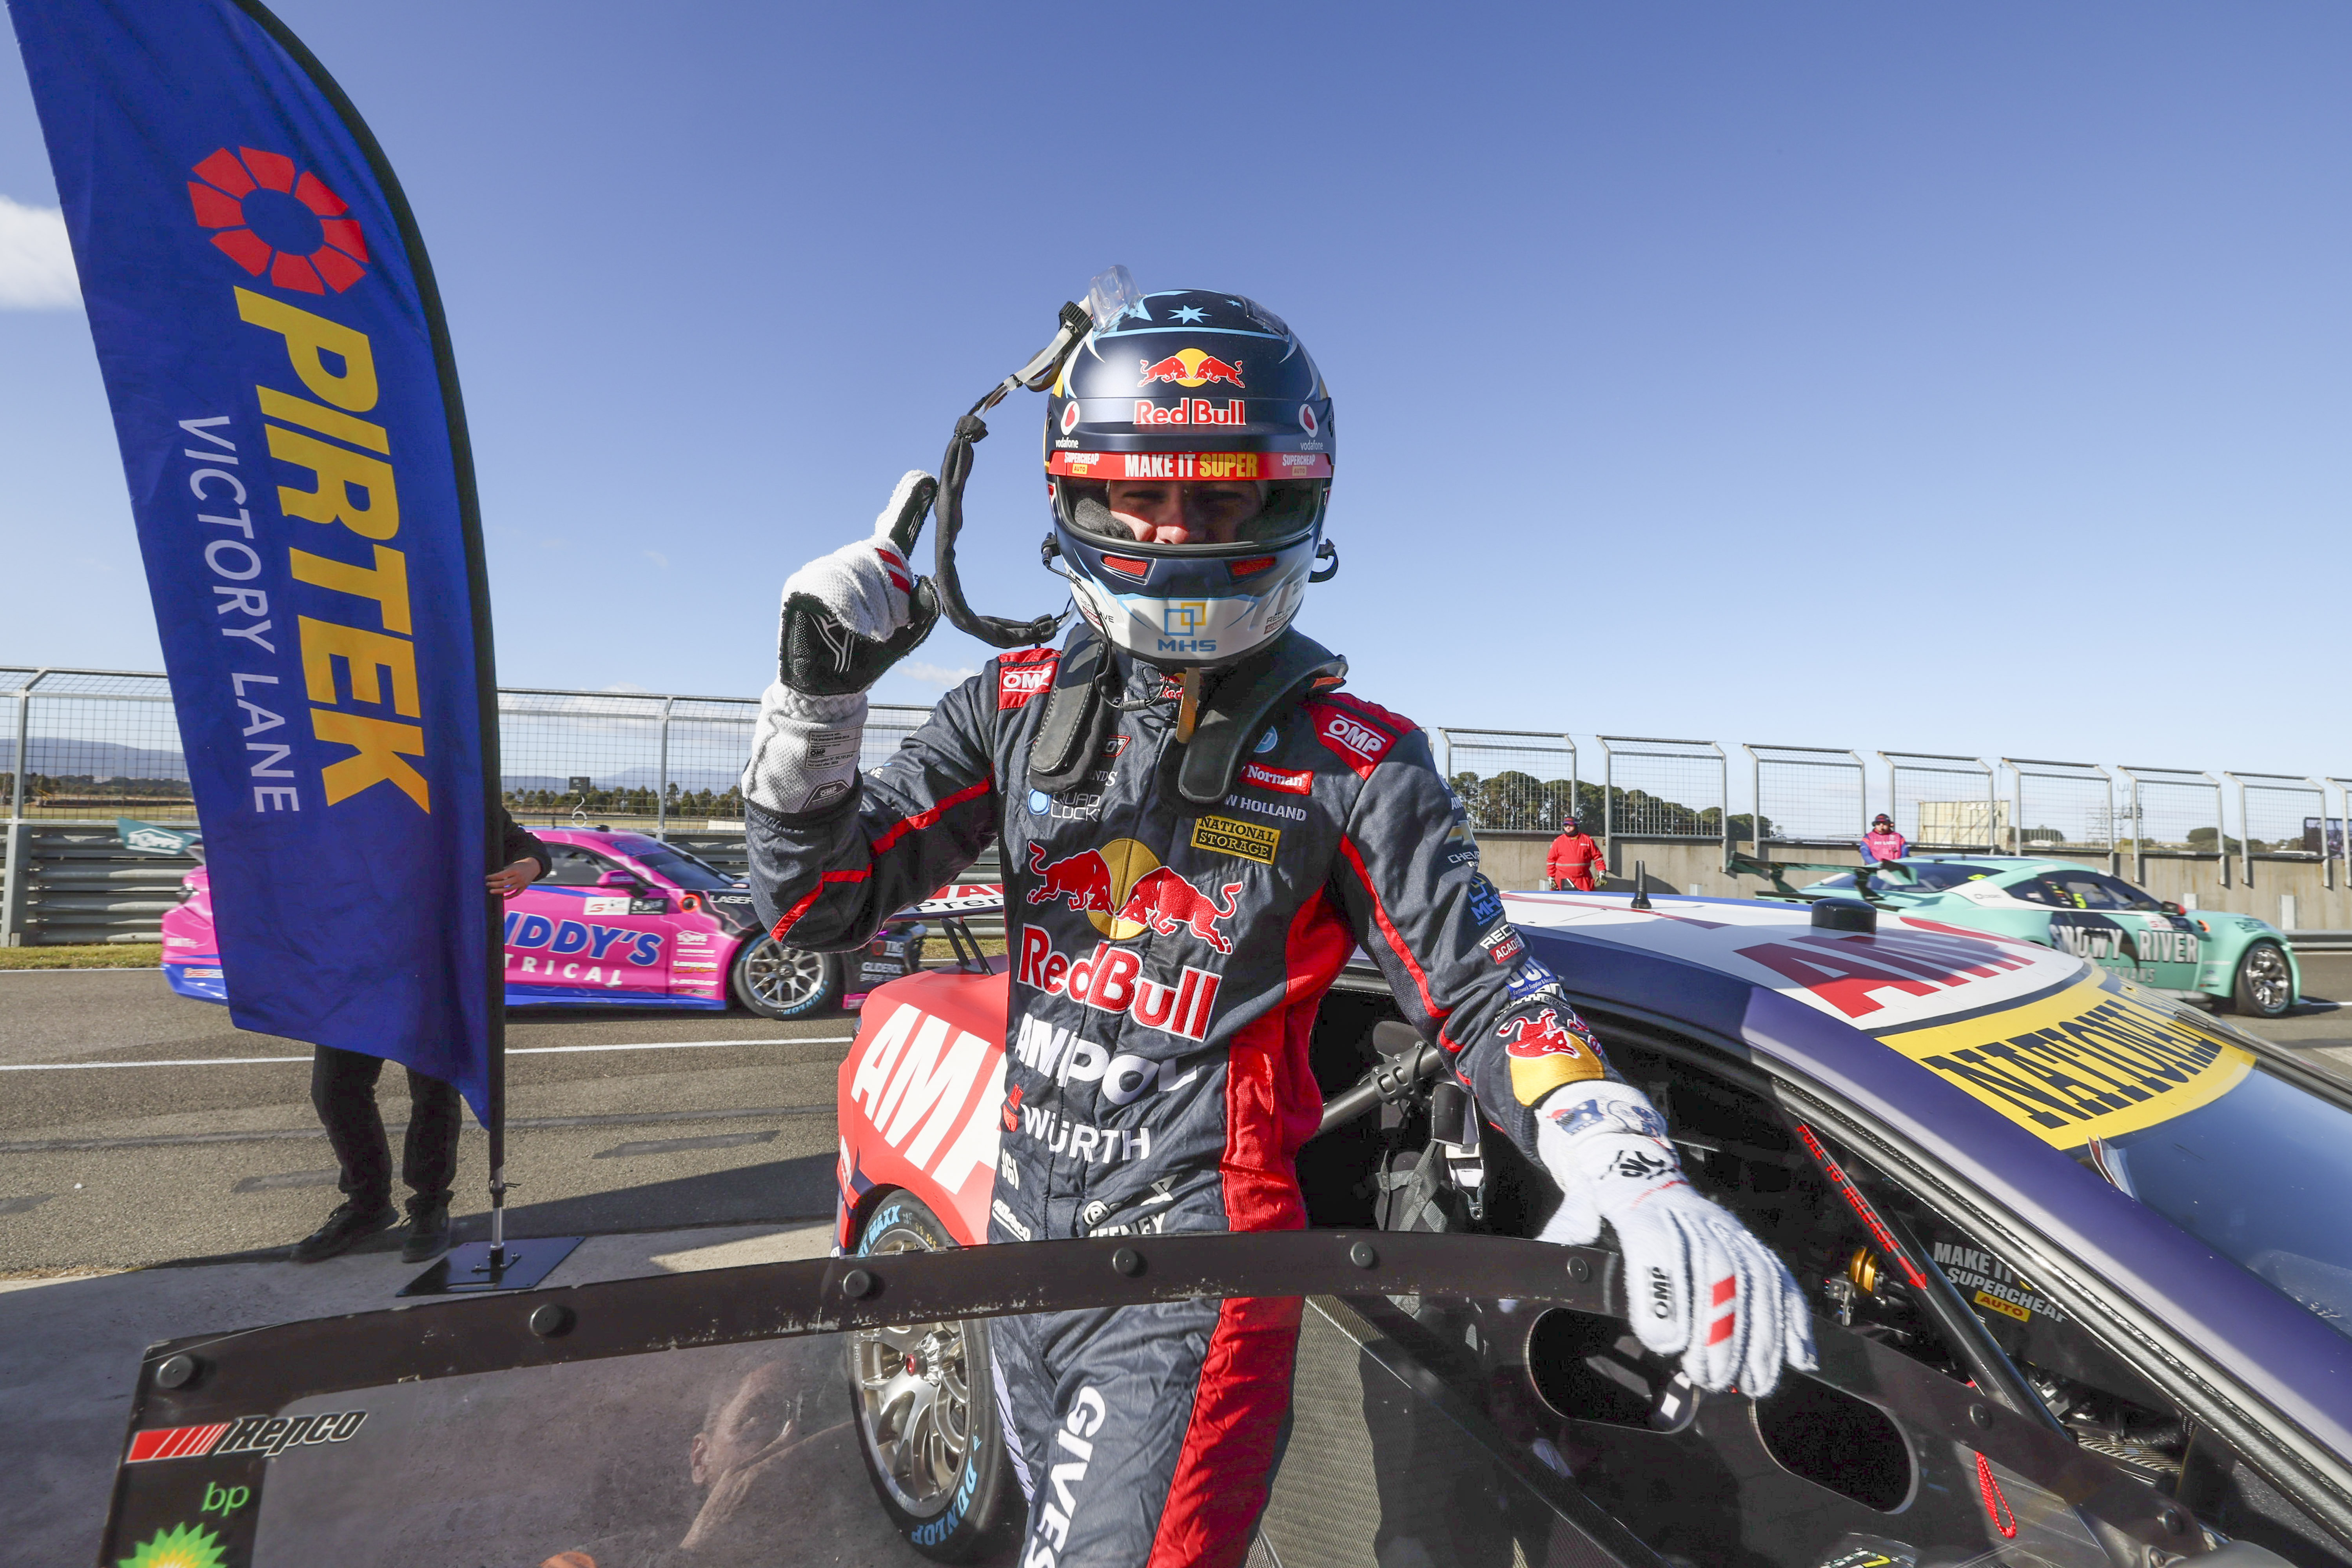 "Mr. Sunday" Feeney claims Race 11 win as van Gisbergen crashes out